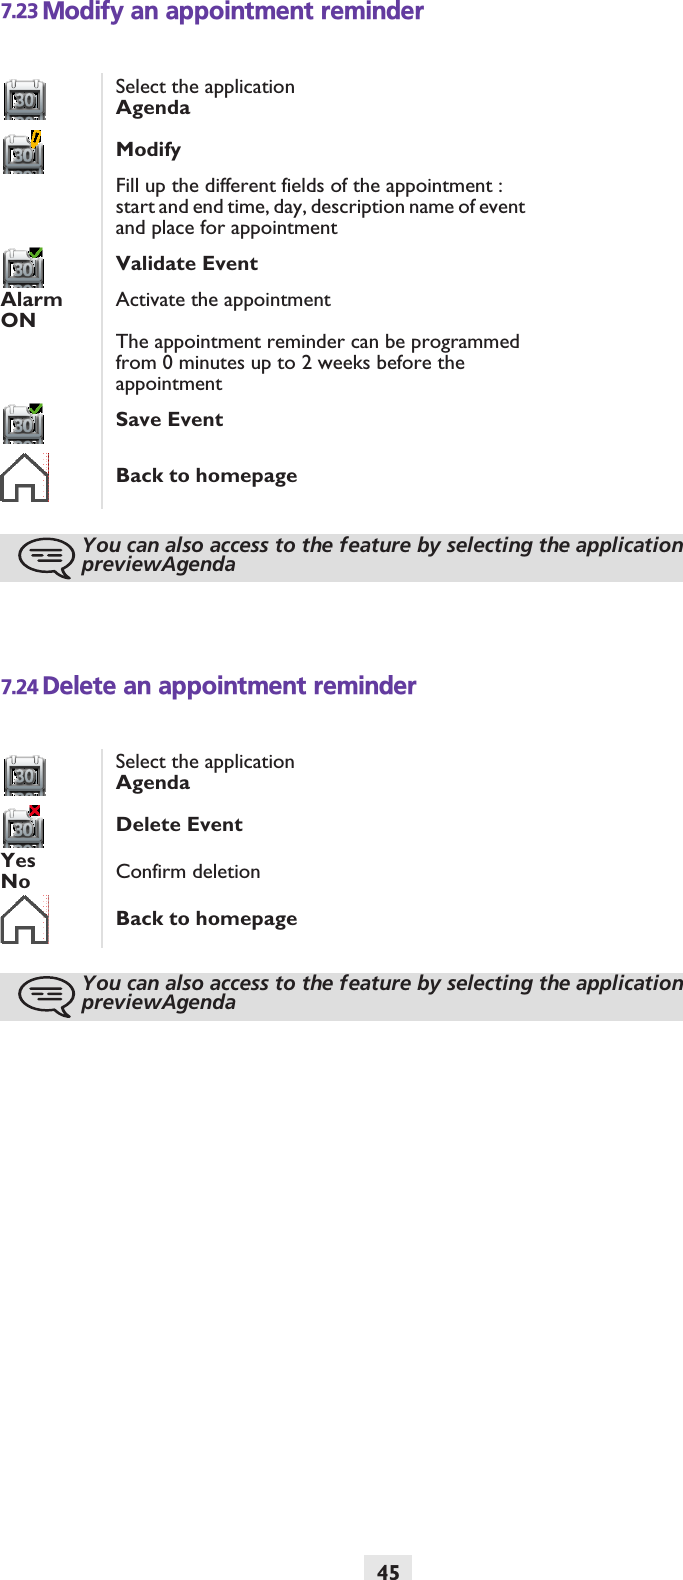 457.23 Modify an appointment reminder7.24 Delete an appointment reminderSelect the applicationAgendaModifyFill up the different fields of the appointment : start and end time, day, description name of event and place for appointmentValidate EventAlarm ONActivate the appointmentThe appointment reminder can be programmed from 0 minutes up to 2 weeks before the appointmentSave Event Back to homepageYou can also access to the feature by selecting the application previewAgendaSelect the applicationAgendaDelete EventYesNo Confirm deletionBack to homepageYou can also access to the feature by selecting the application previewAgenda